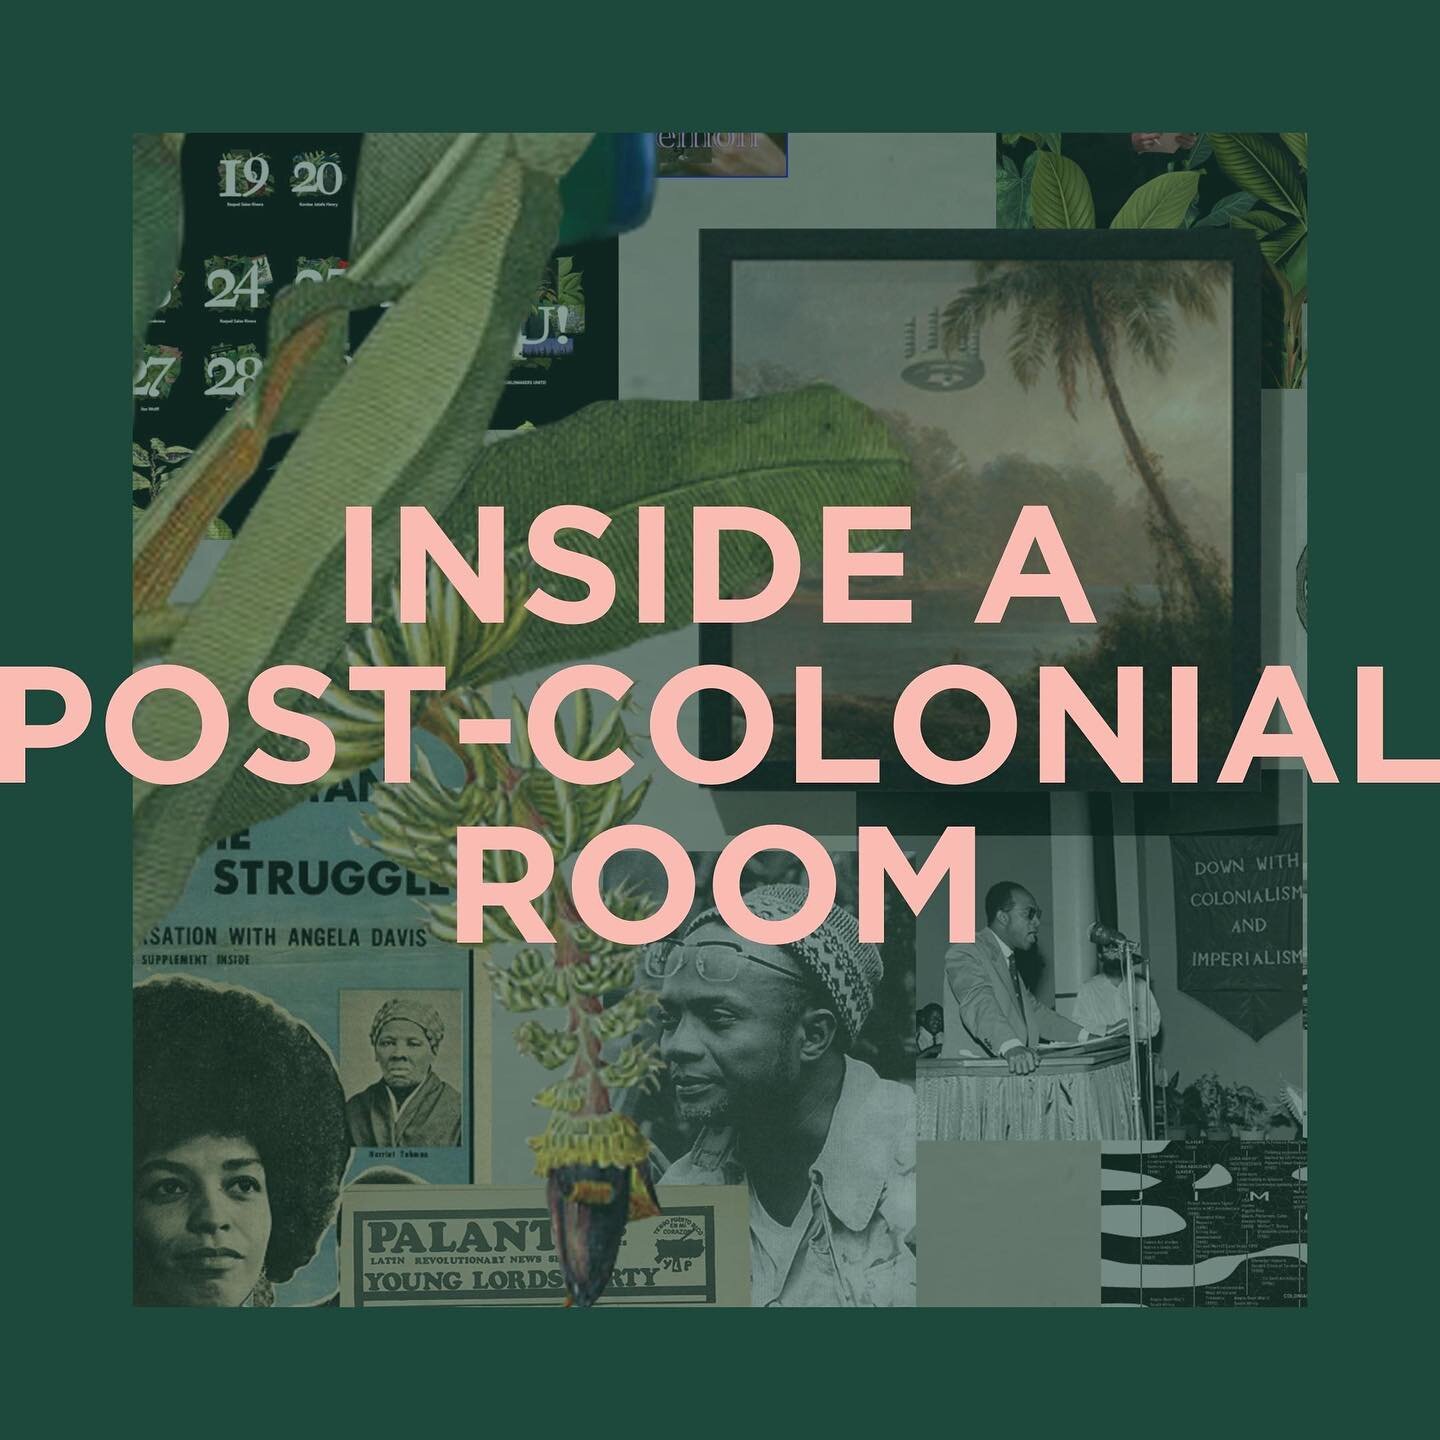 We&rsquo;ve got a surprise at the centrefold of The Edit! 🎁 Every issue comes with a large format poster with artwork by WAI Think Tank. Observe a post-colonial room, filled with remnants of empire and calls for resistance. 

@garciafrankowski
@wait